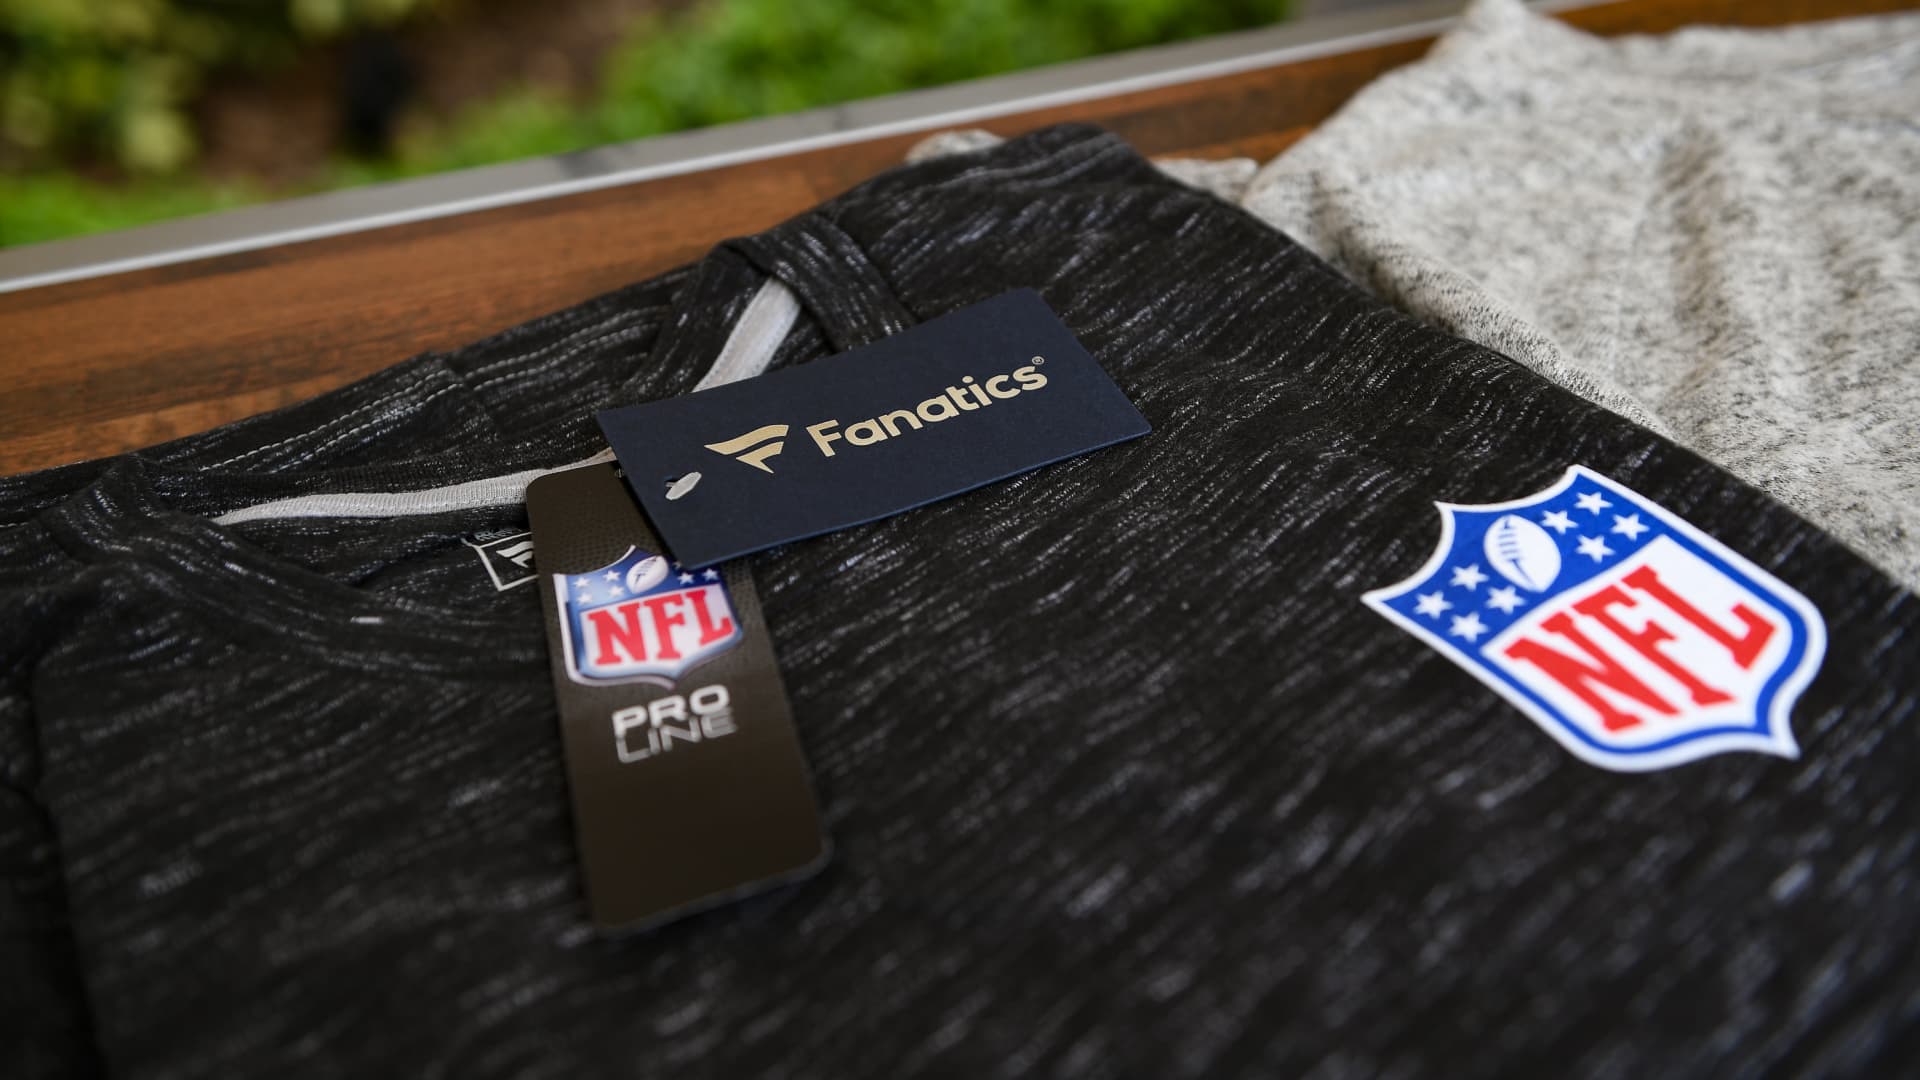 A detailed photo of the Fanatics apparel displayed at NFL Hospitality during the 2018 NFL Annual Meetings at the Ritz Carlton Orlando, Great Lakes on March 26, 2018 in Orlando, Florida.